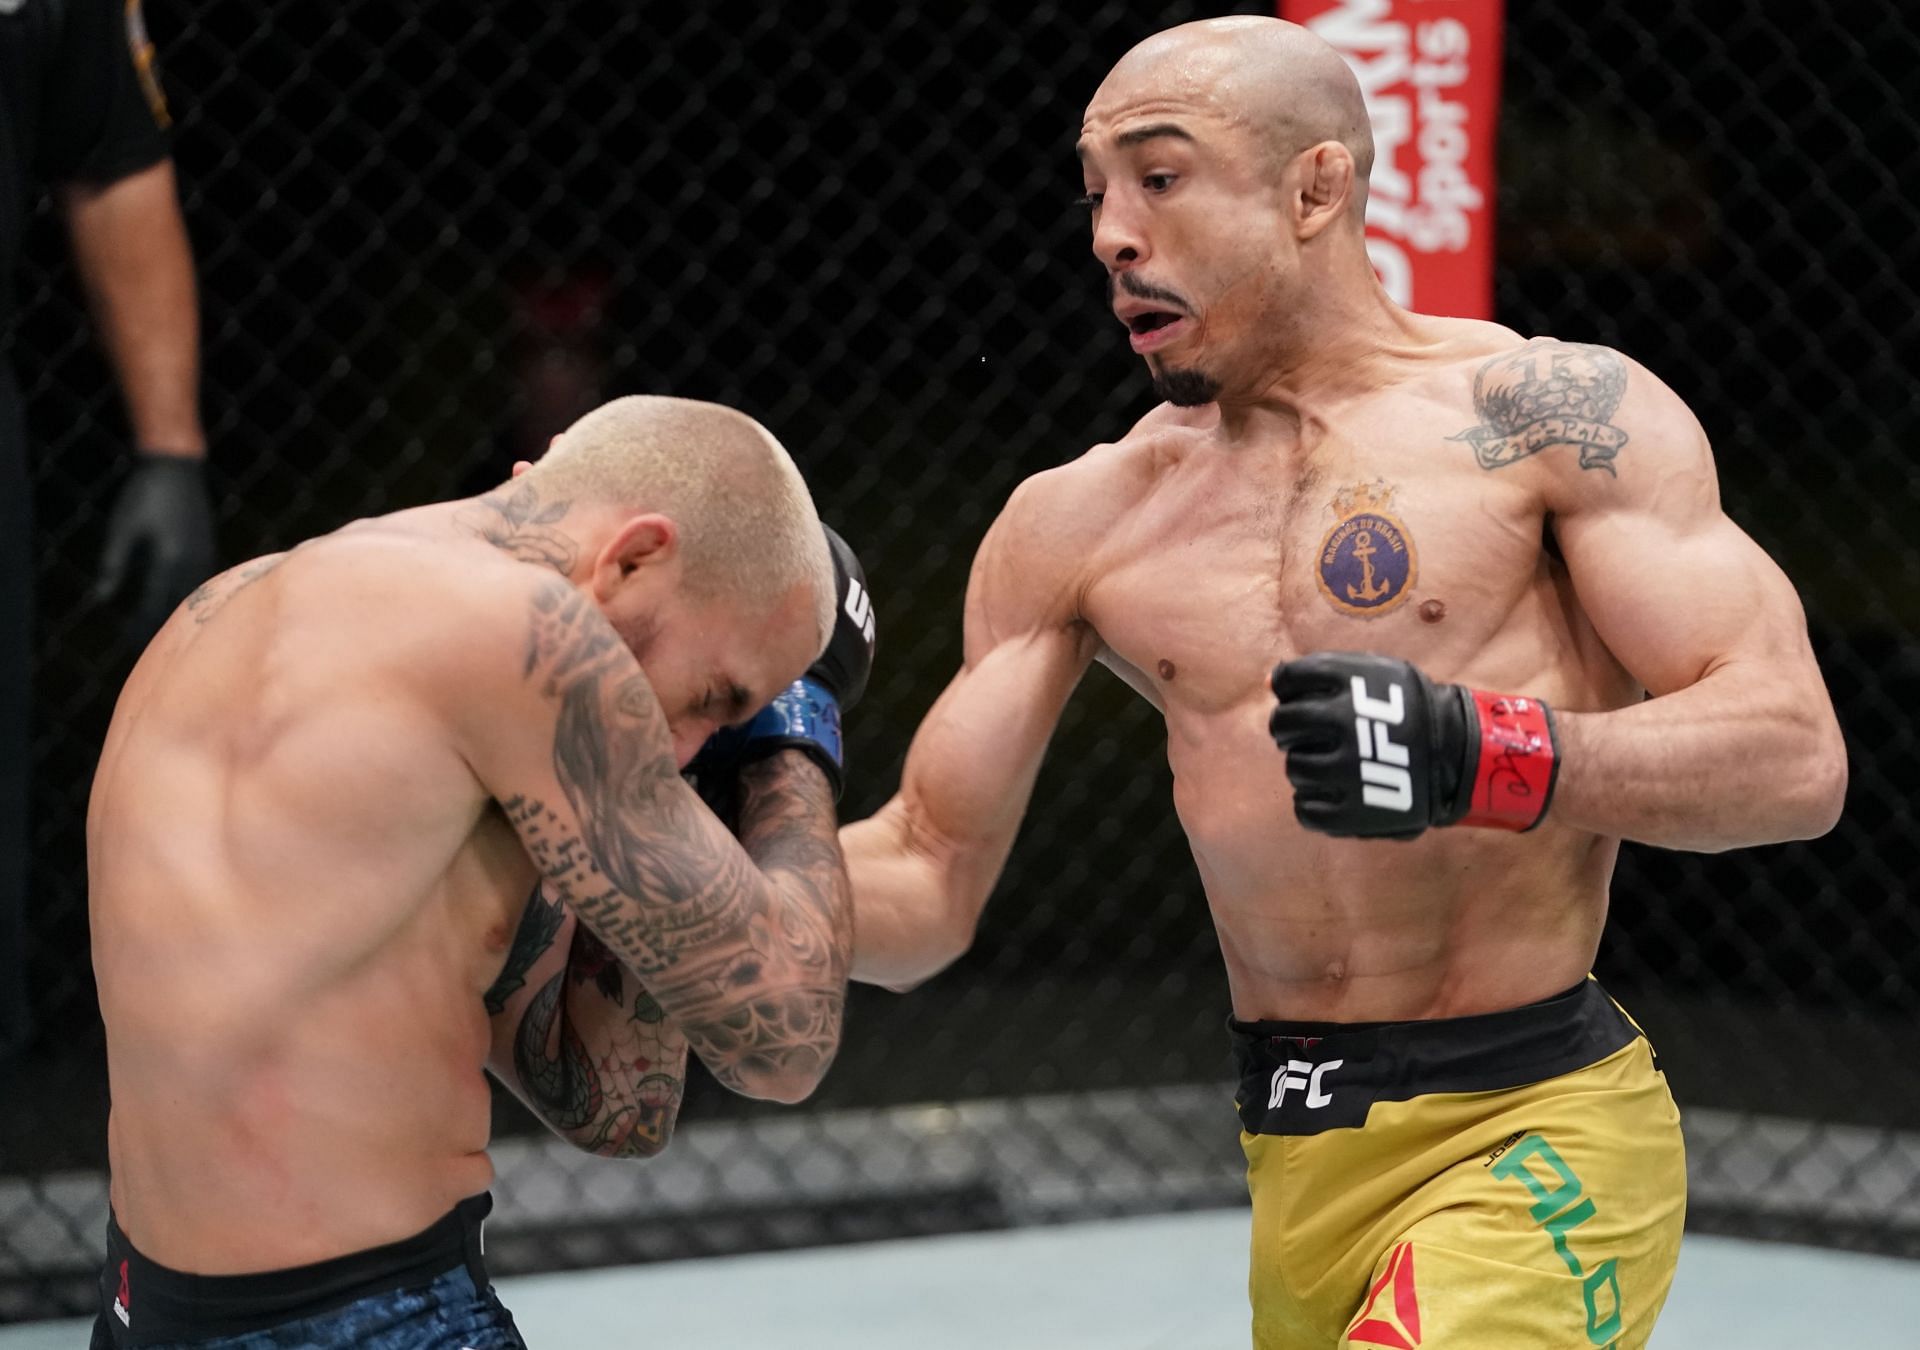 Jose Aldo may have caught on with the fans more had his rivalry with Conor McGregor come a little earlier